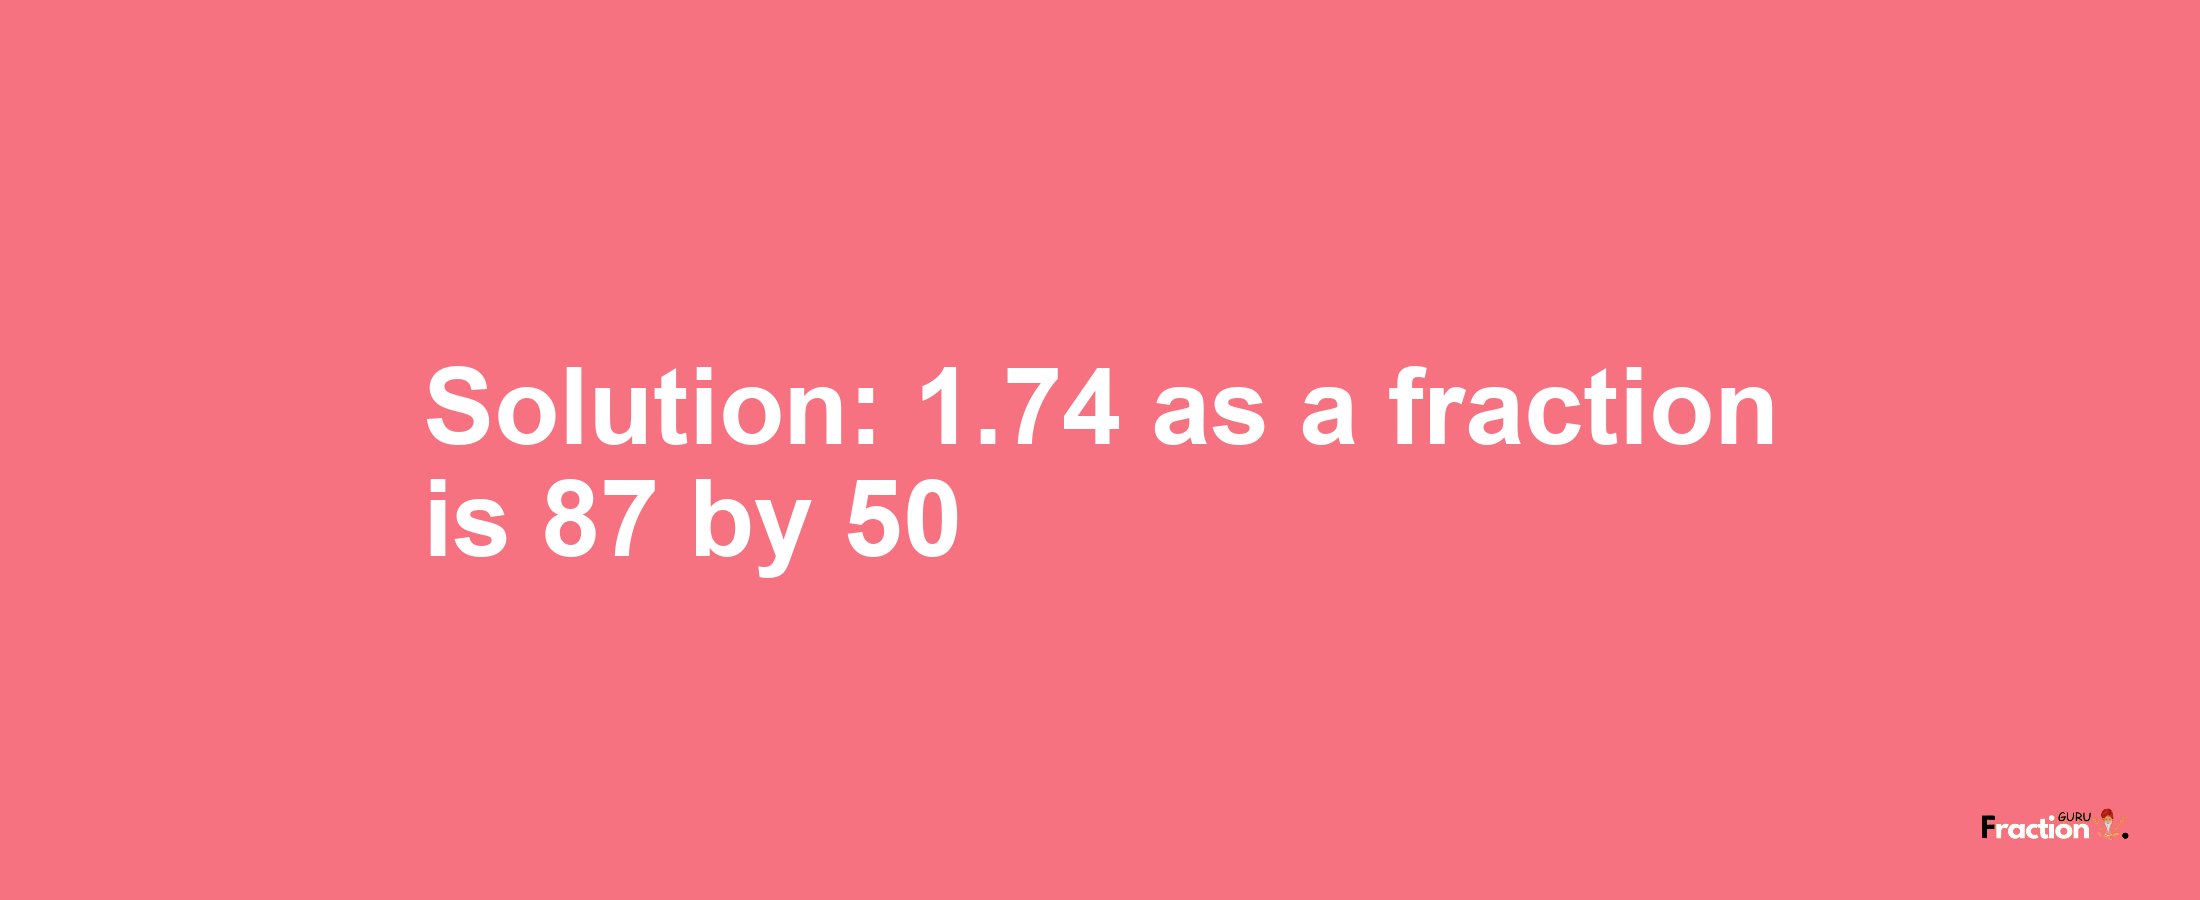 Solution:1.74 as a fraction is 87/50